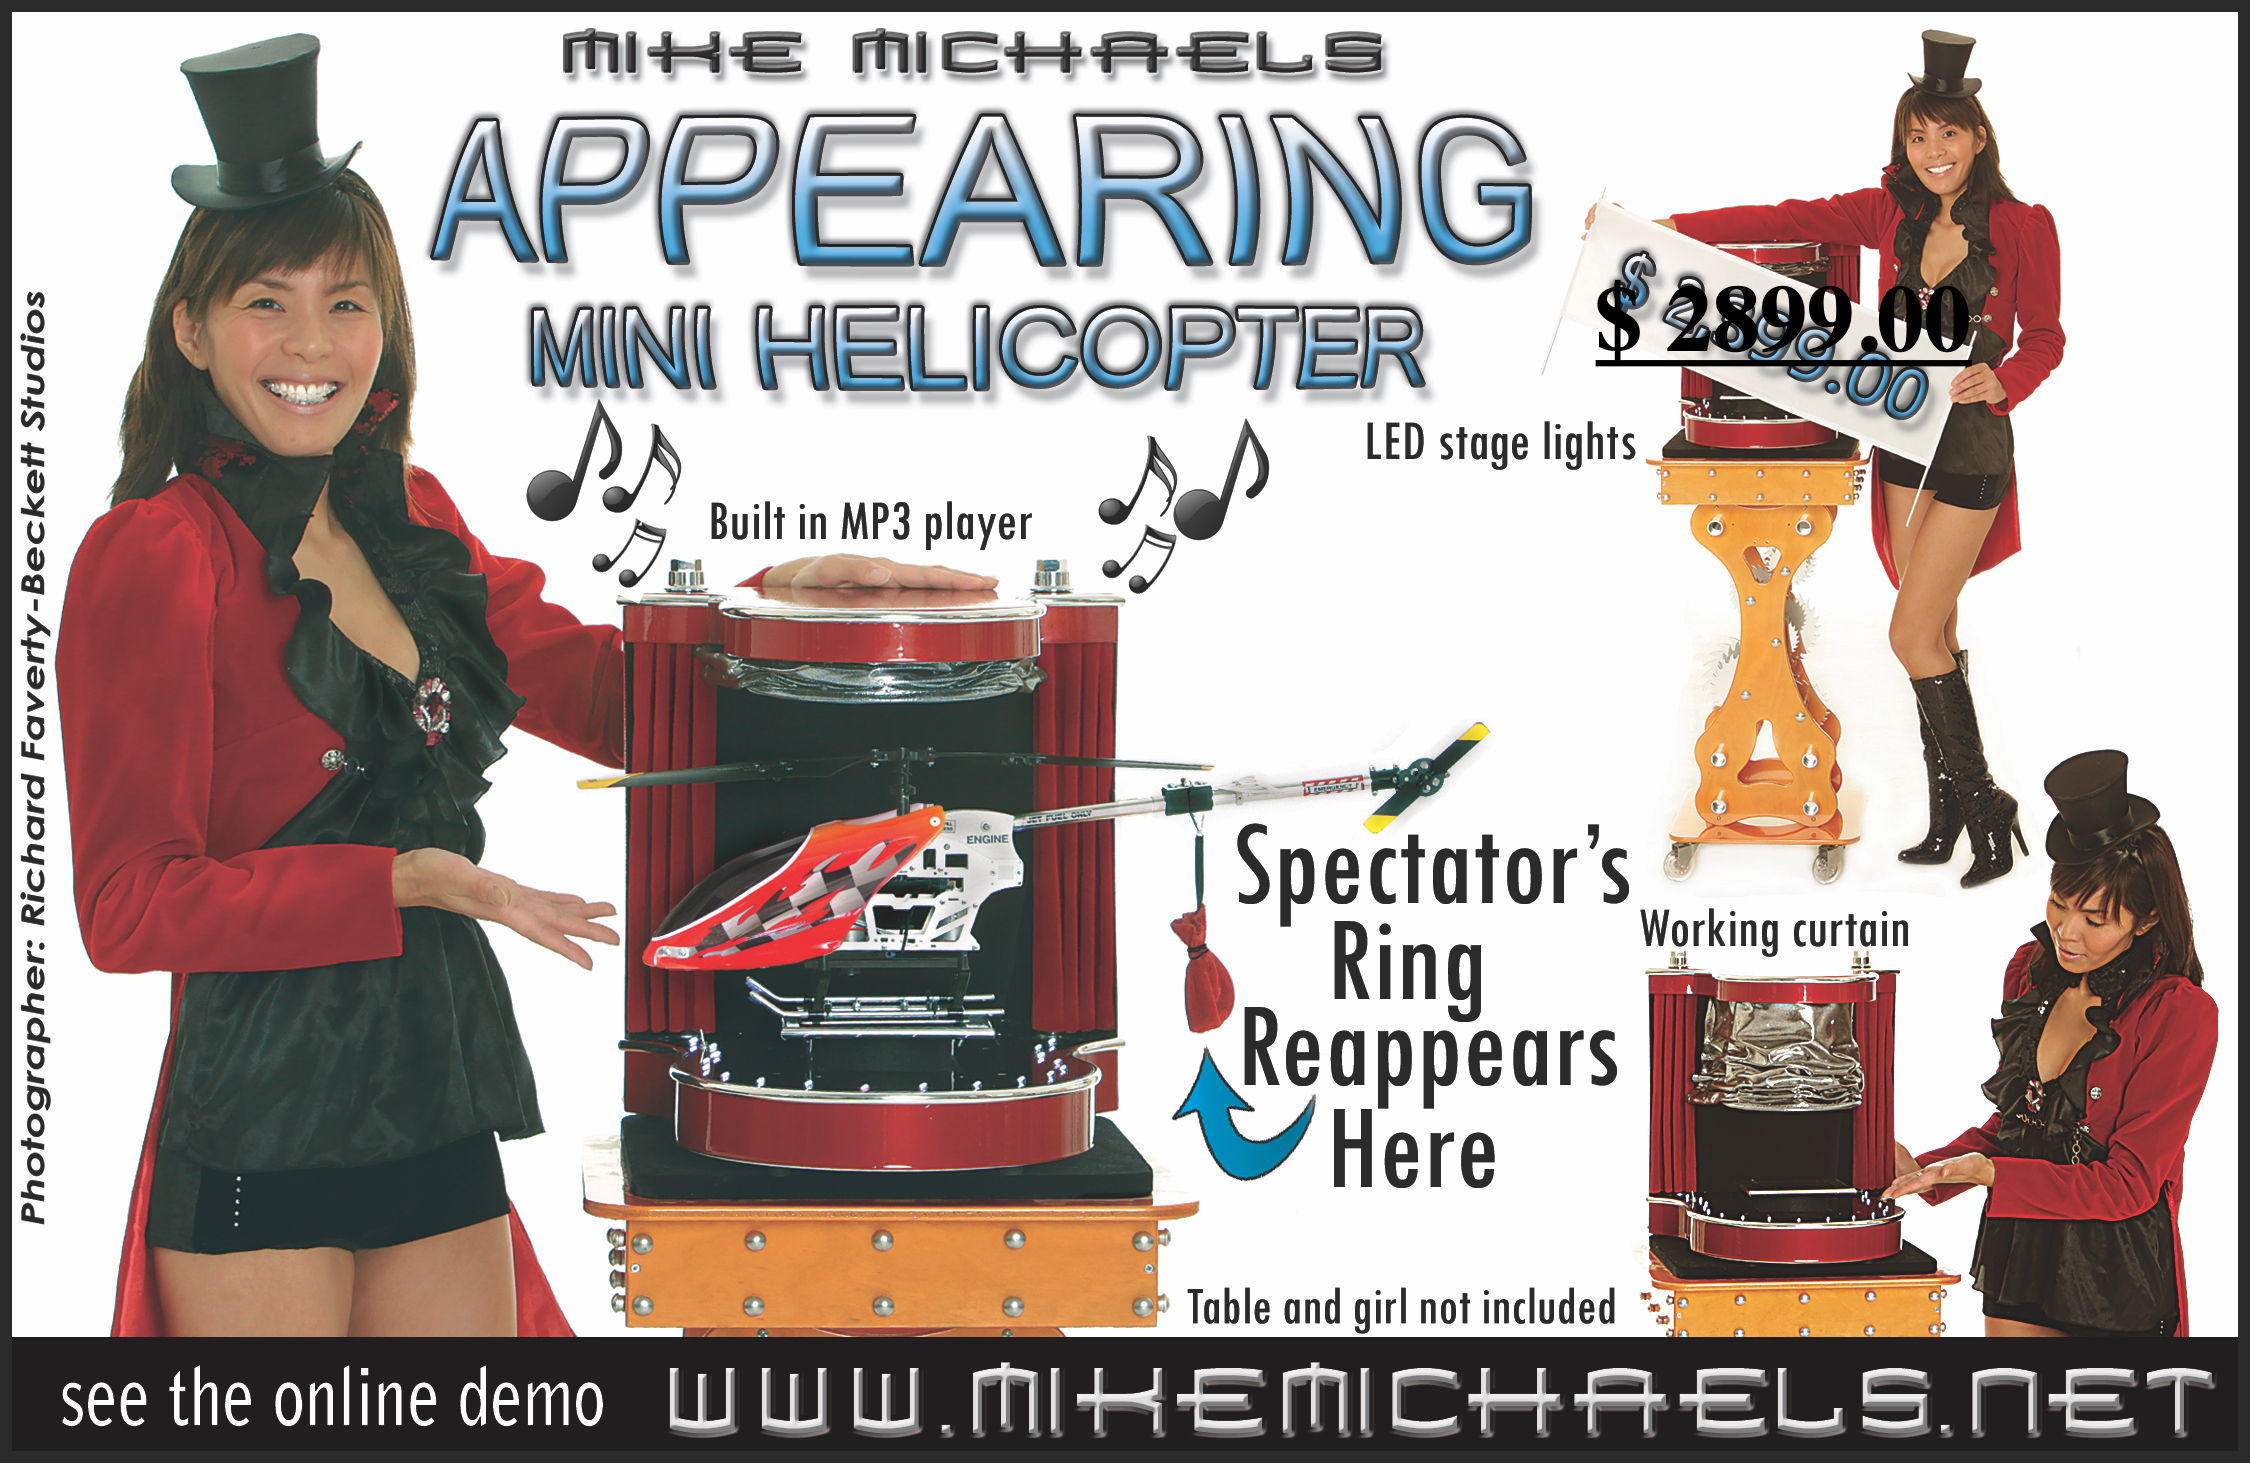 mini helicopter ad new price July 2016.jpg